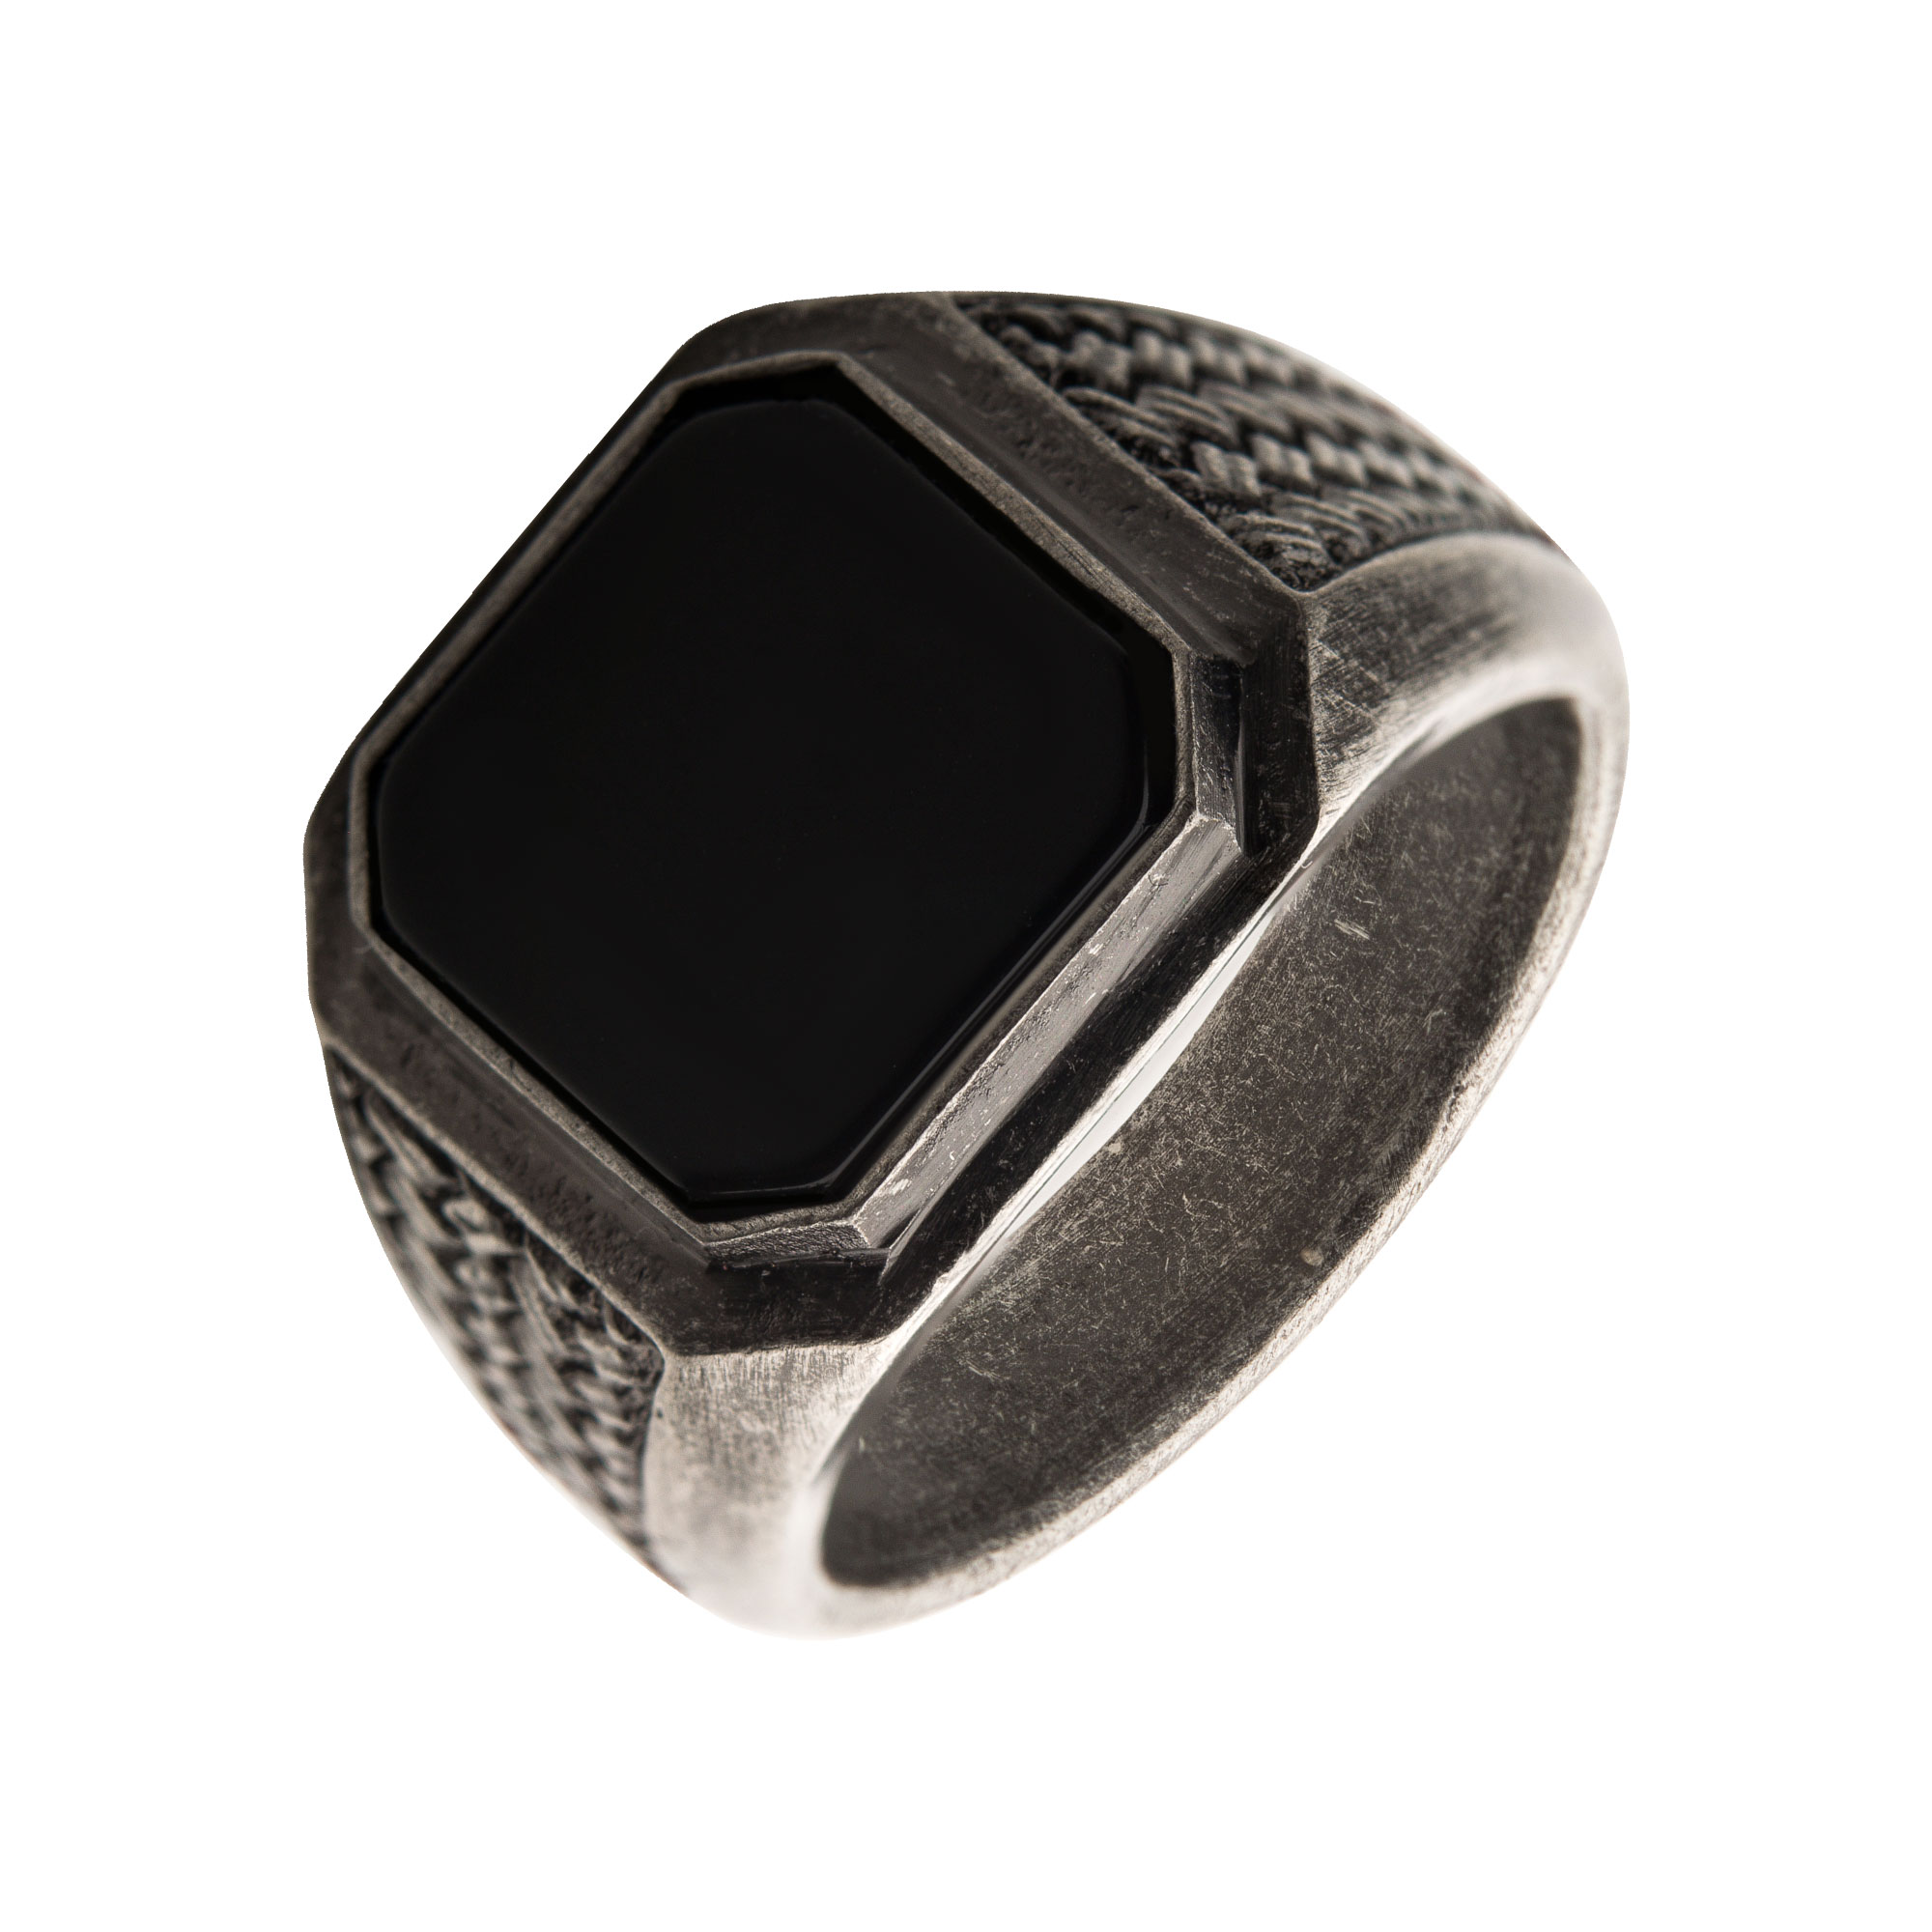 Stainless Steel Silver Plated with Black Agate Stone Ring Morin Jewelers Southbridge, MA